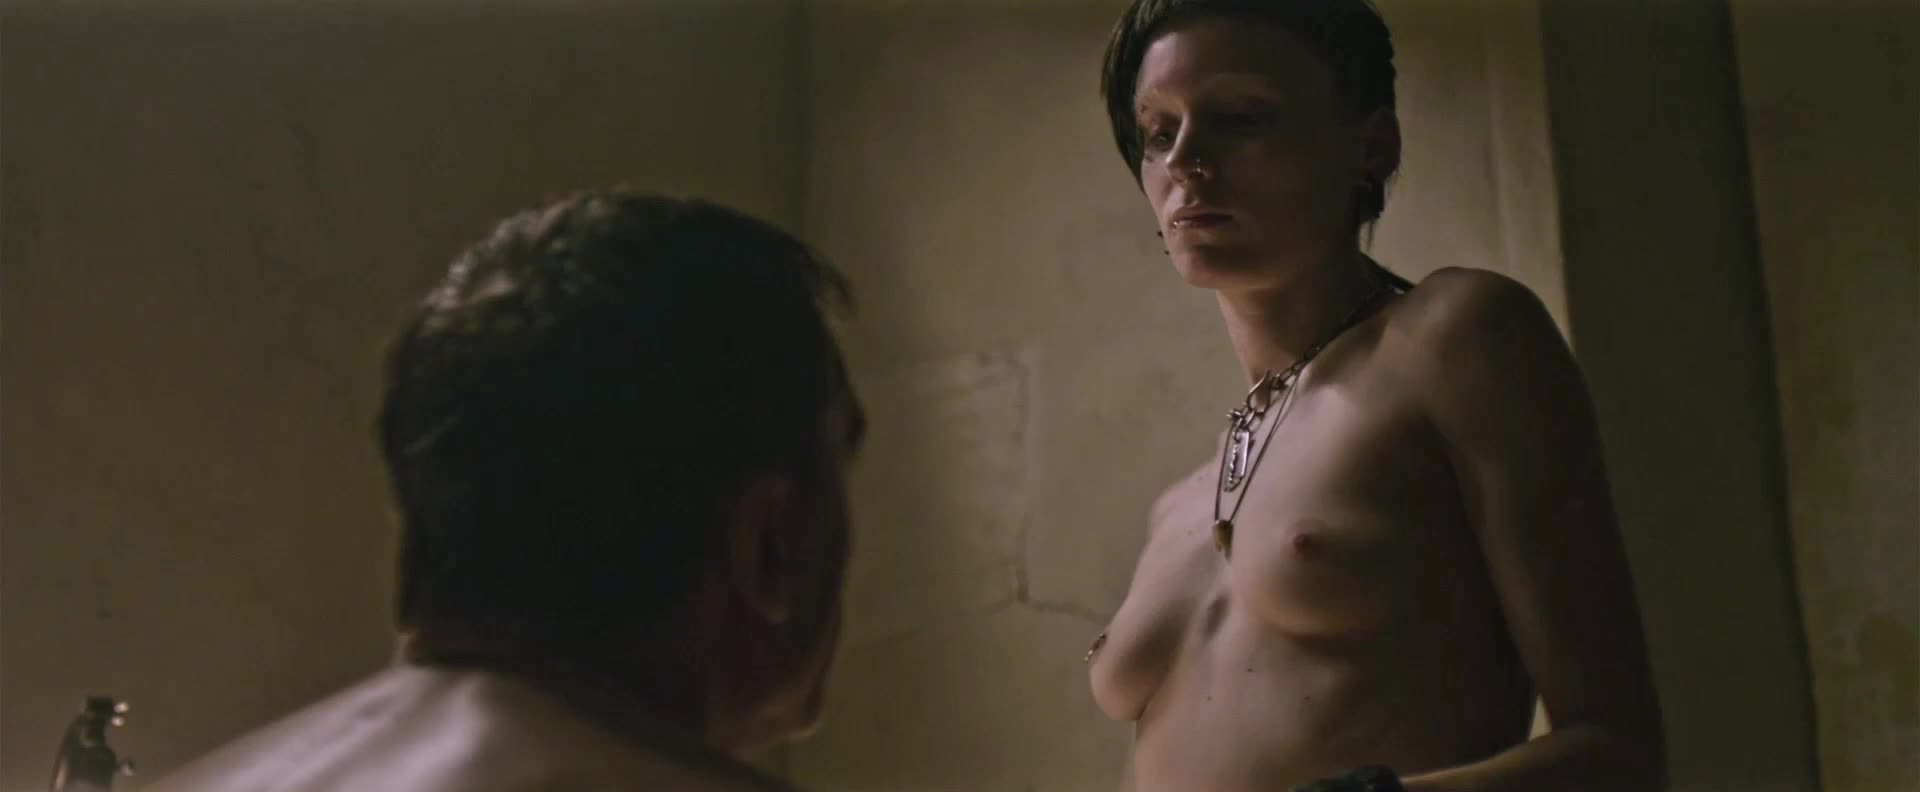 Nude debut: Rooney Mara in 'The Girl with the Dragon Tattoo' - GI...